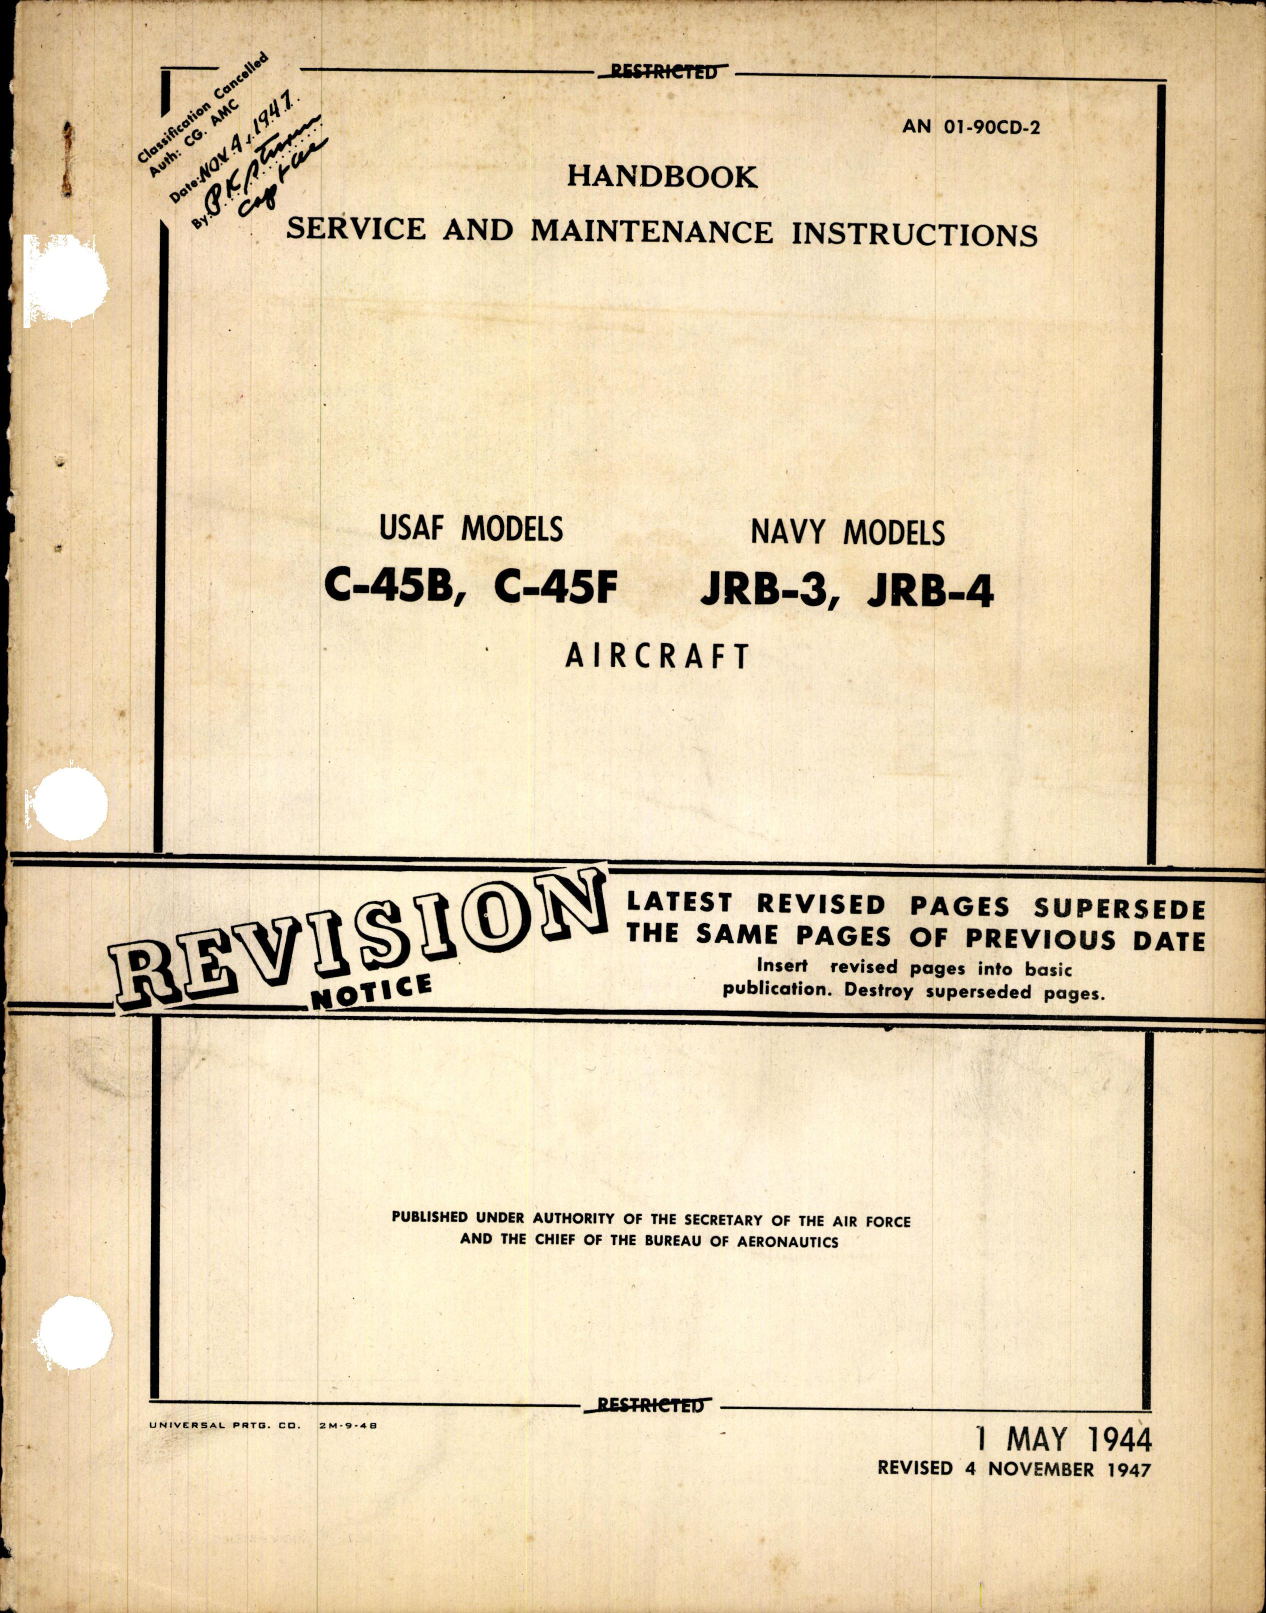 Sample page 1 from AirCorps Library document: Service and Maintenance Instructions for C-45B, C-45F, JRB-3 and JRB-4